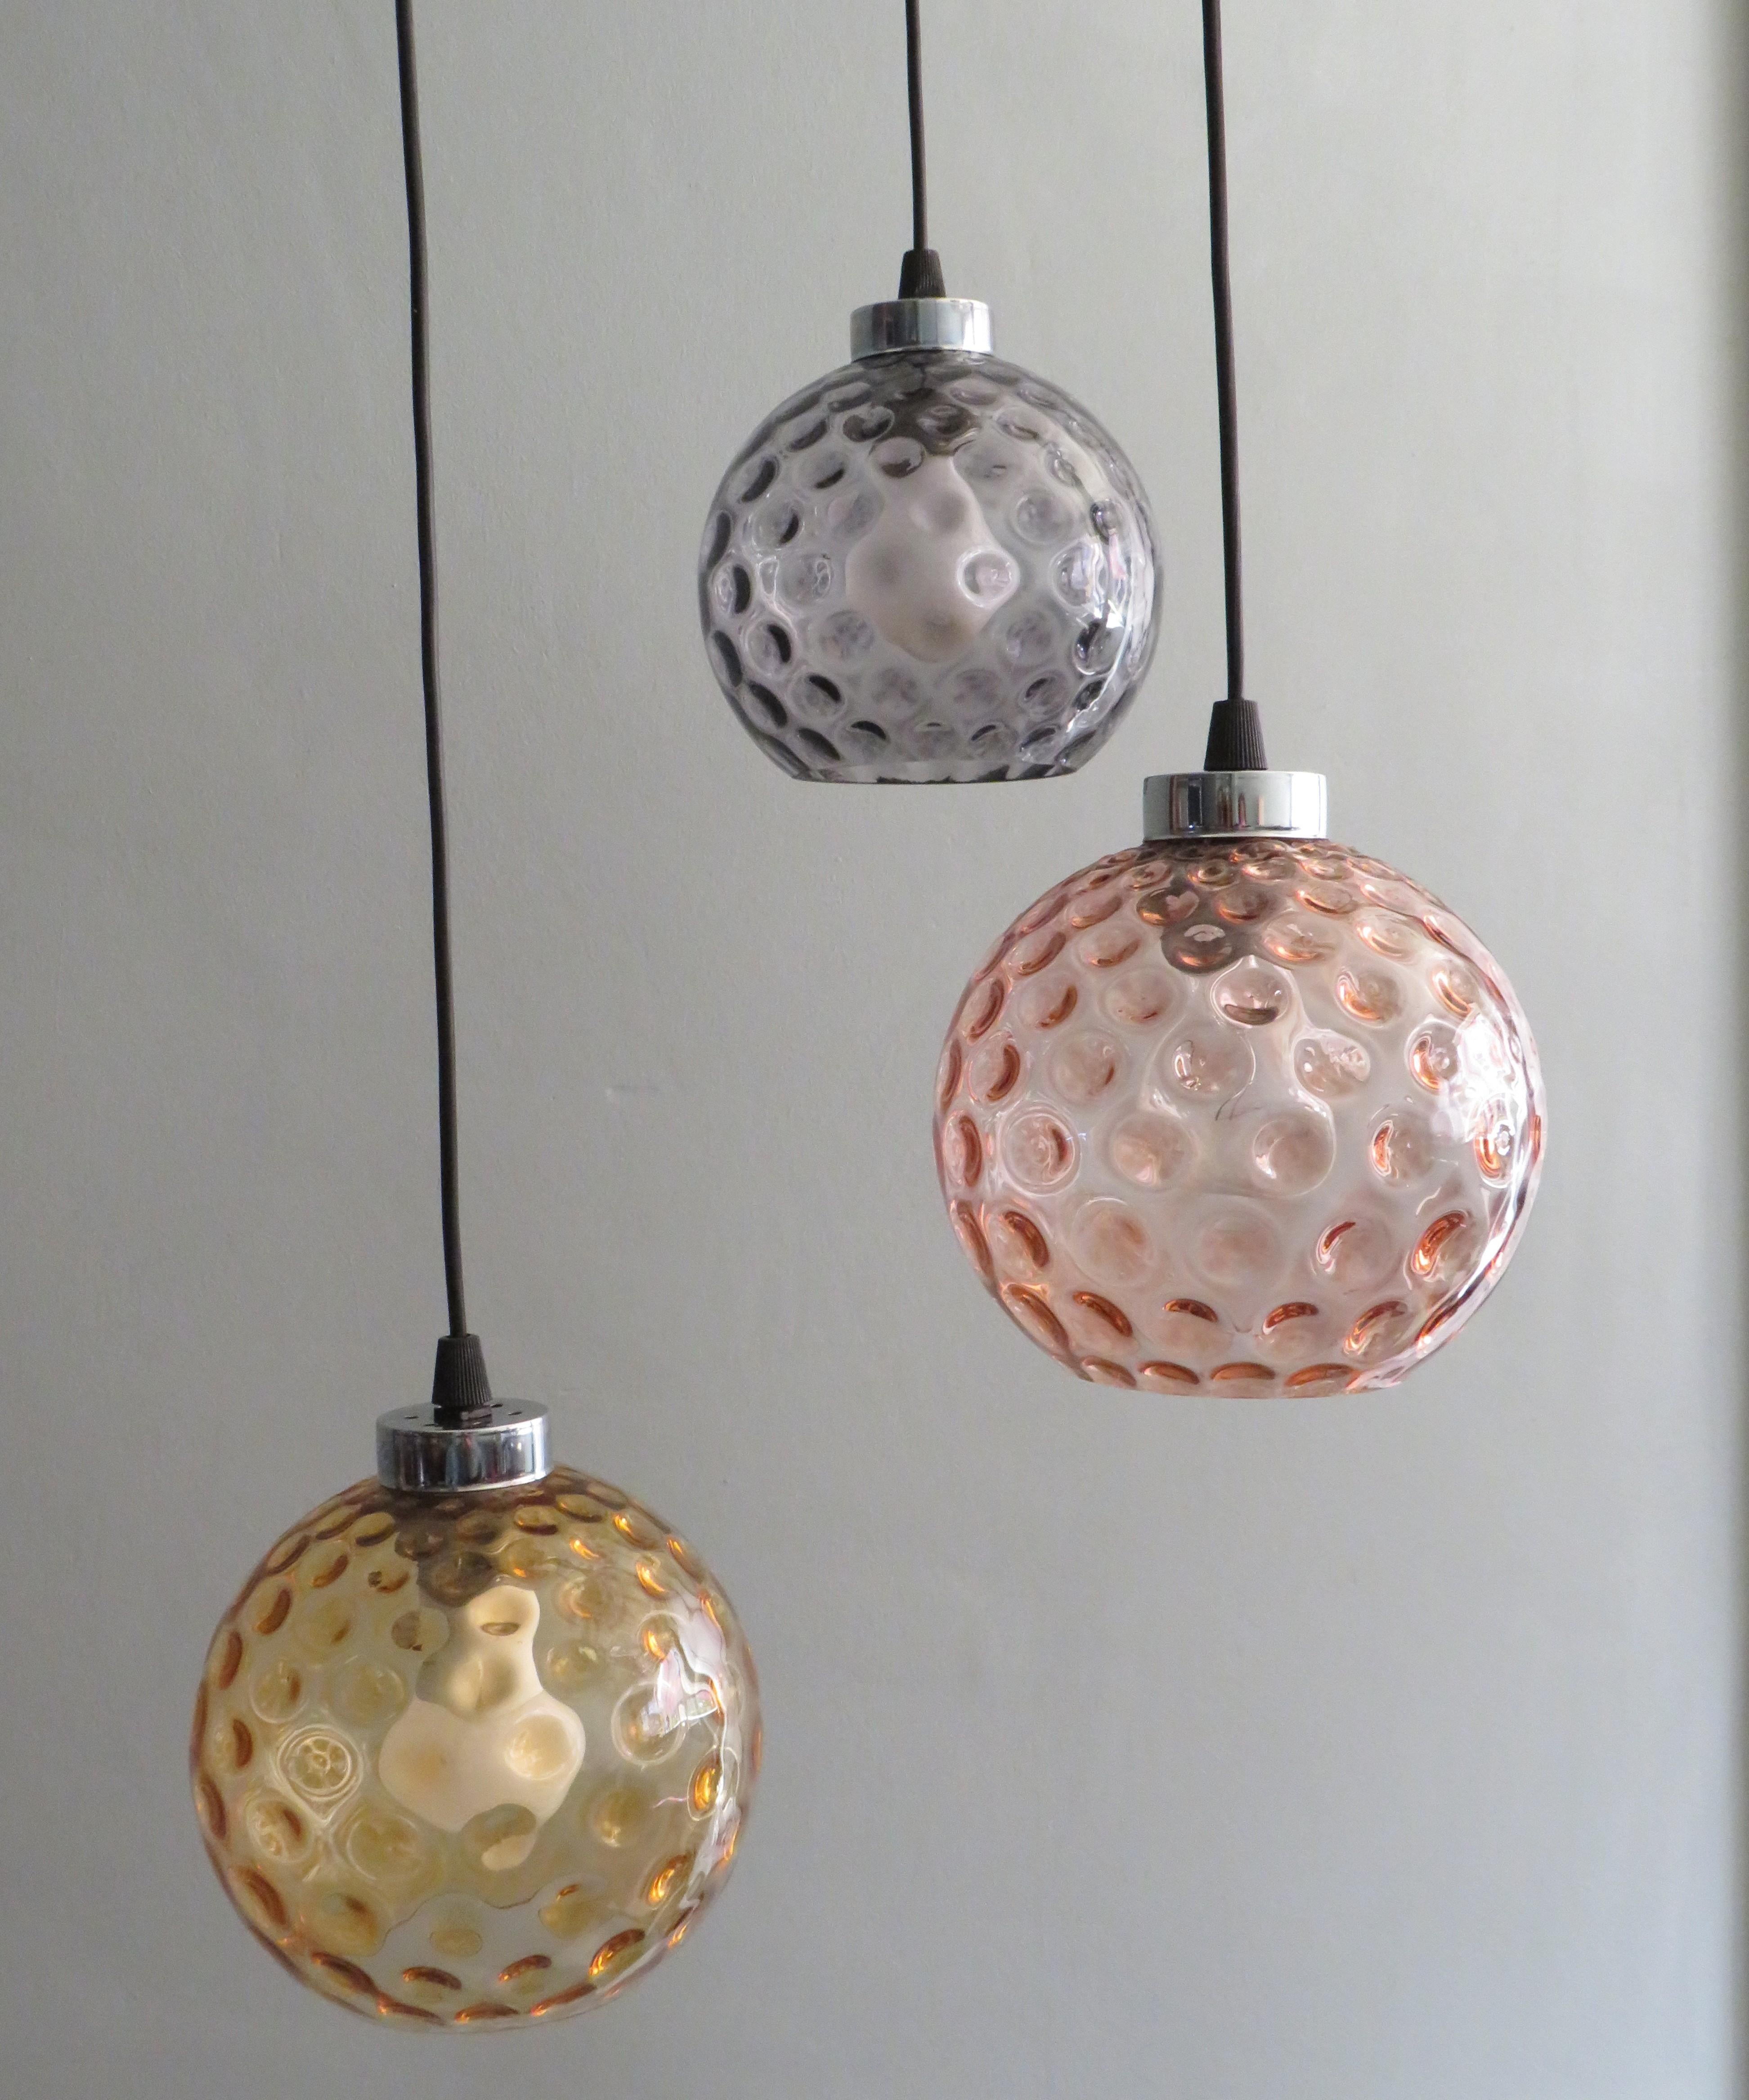 Cascade chandelier, Peill and Putzler, Germany 1960-1970.
Hanging lamp with 3 bubble glass spheres, pink, amber and mauve colored.
Each sphere can be easily adjusted to the desired height. 
The ceiling plate is made of black lacquered metal and